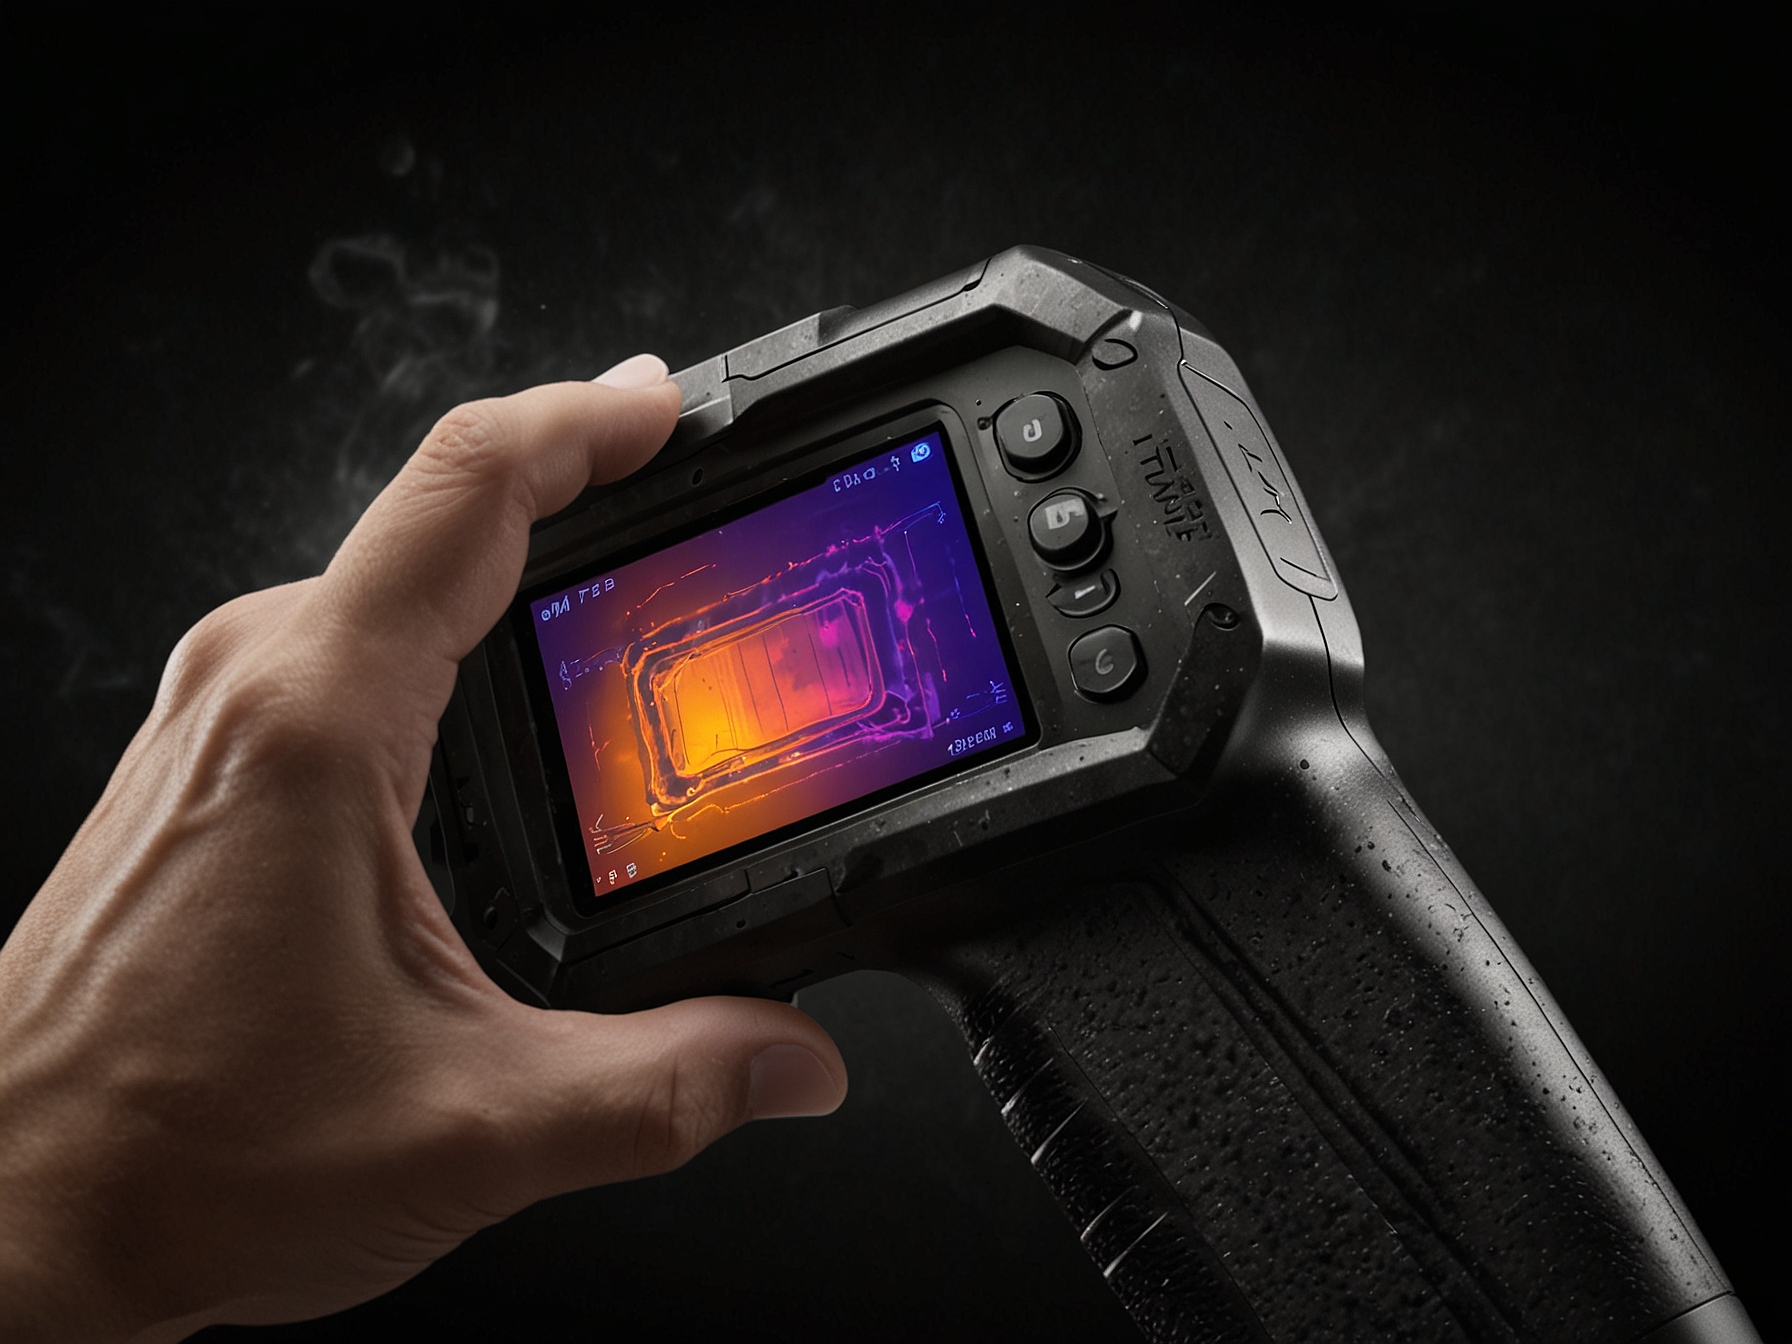 A close-up of the Ulefone Armor 25T Pro's thermal imaging feature in use, highlighting the FLIR Lepton thermal sensor capabilities for detecting heat signatures in complete darkness.